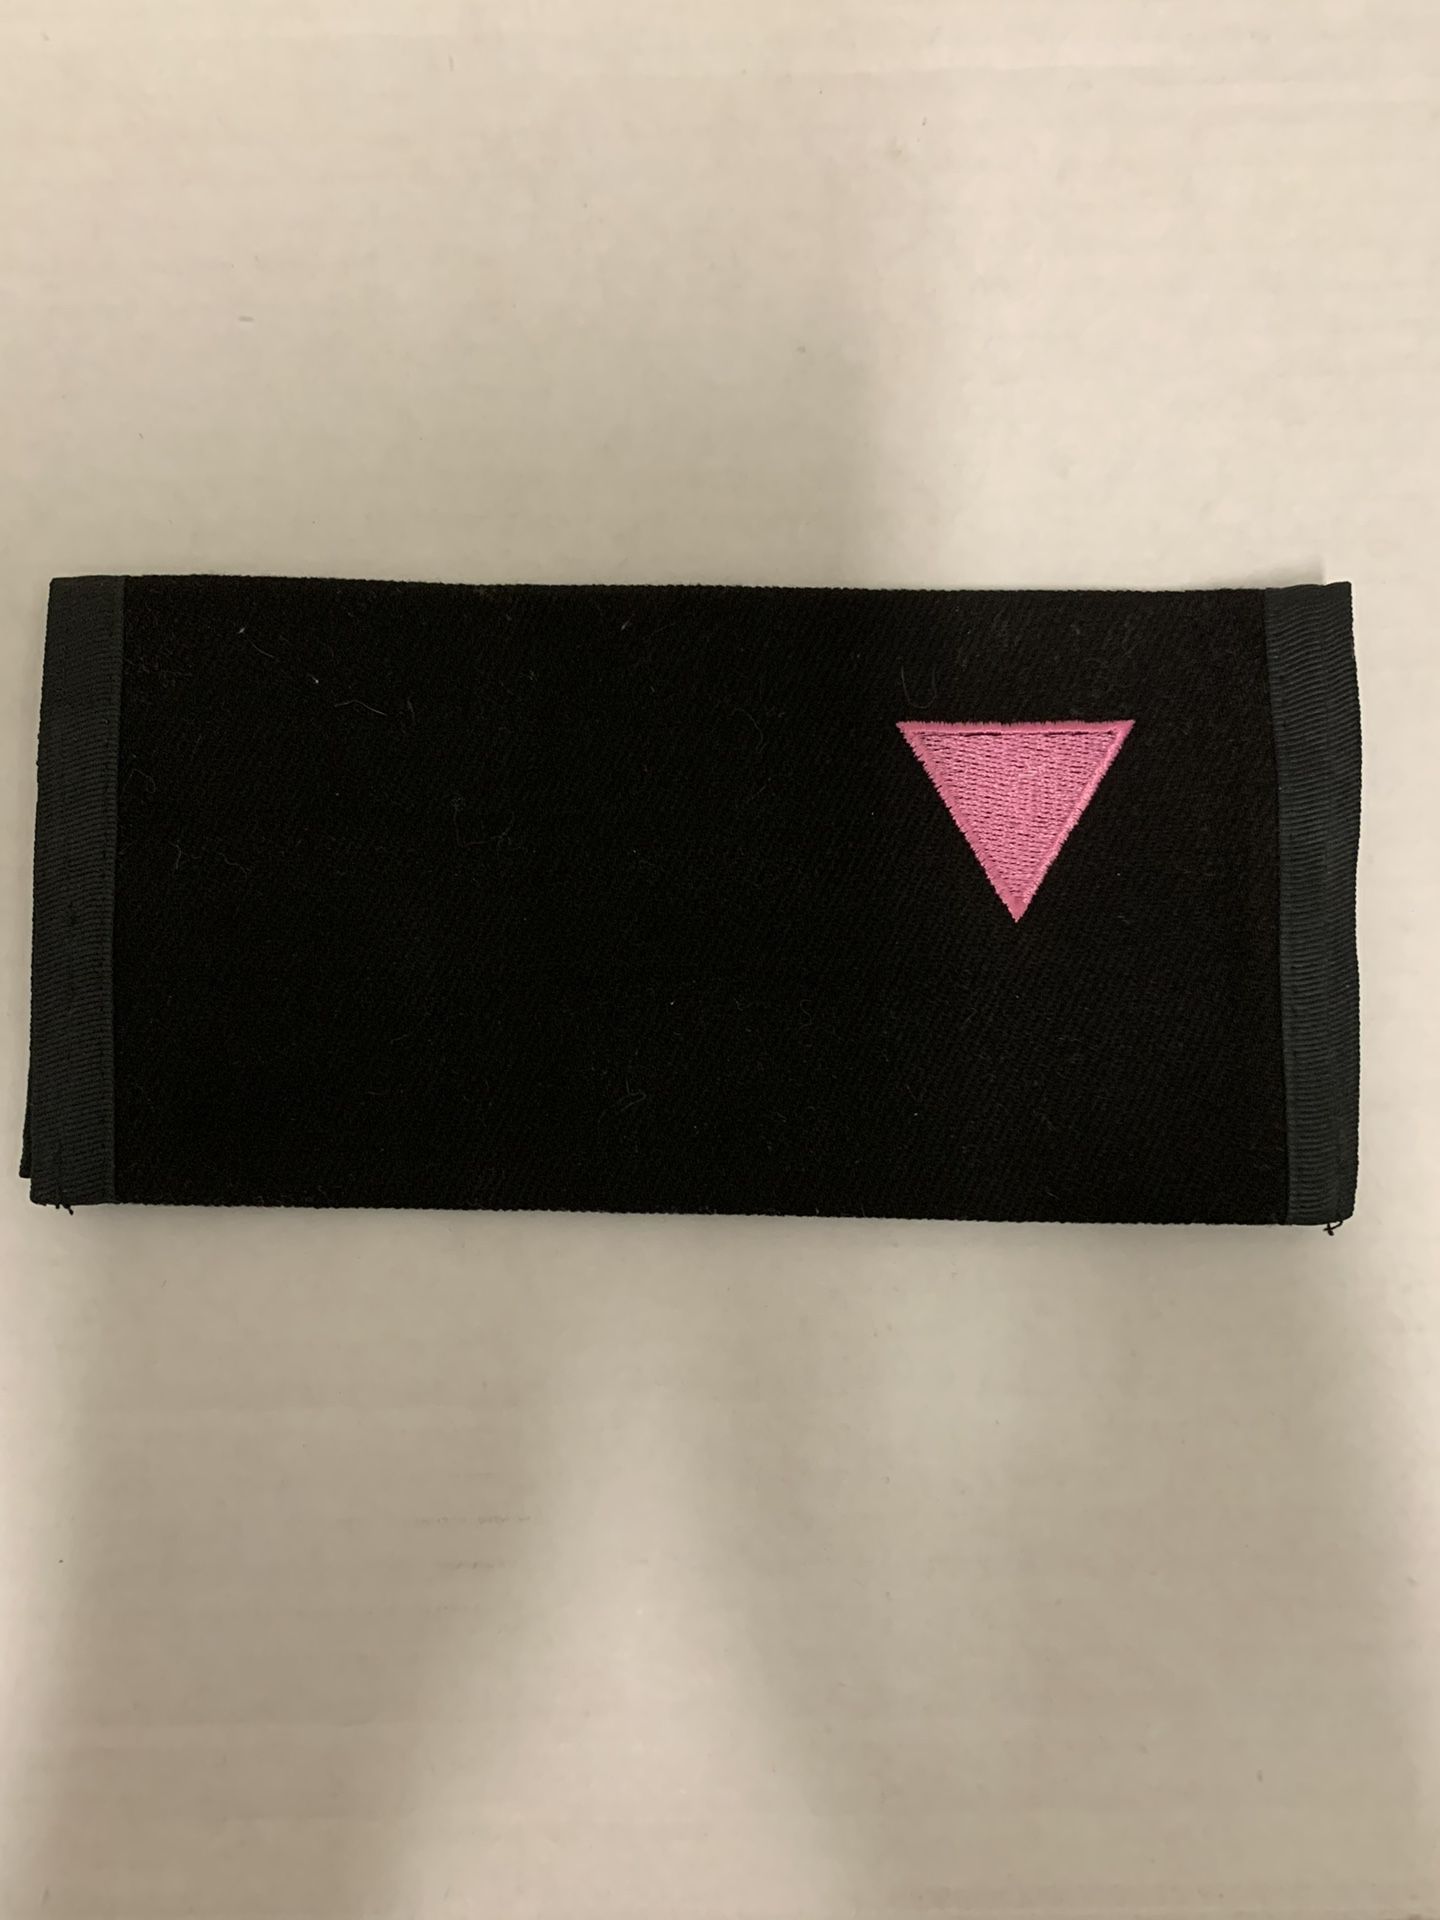 Cloth - Pink Triangle - Check Book Cover - (New)